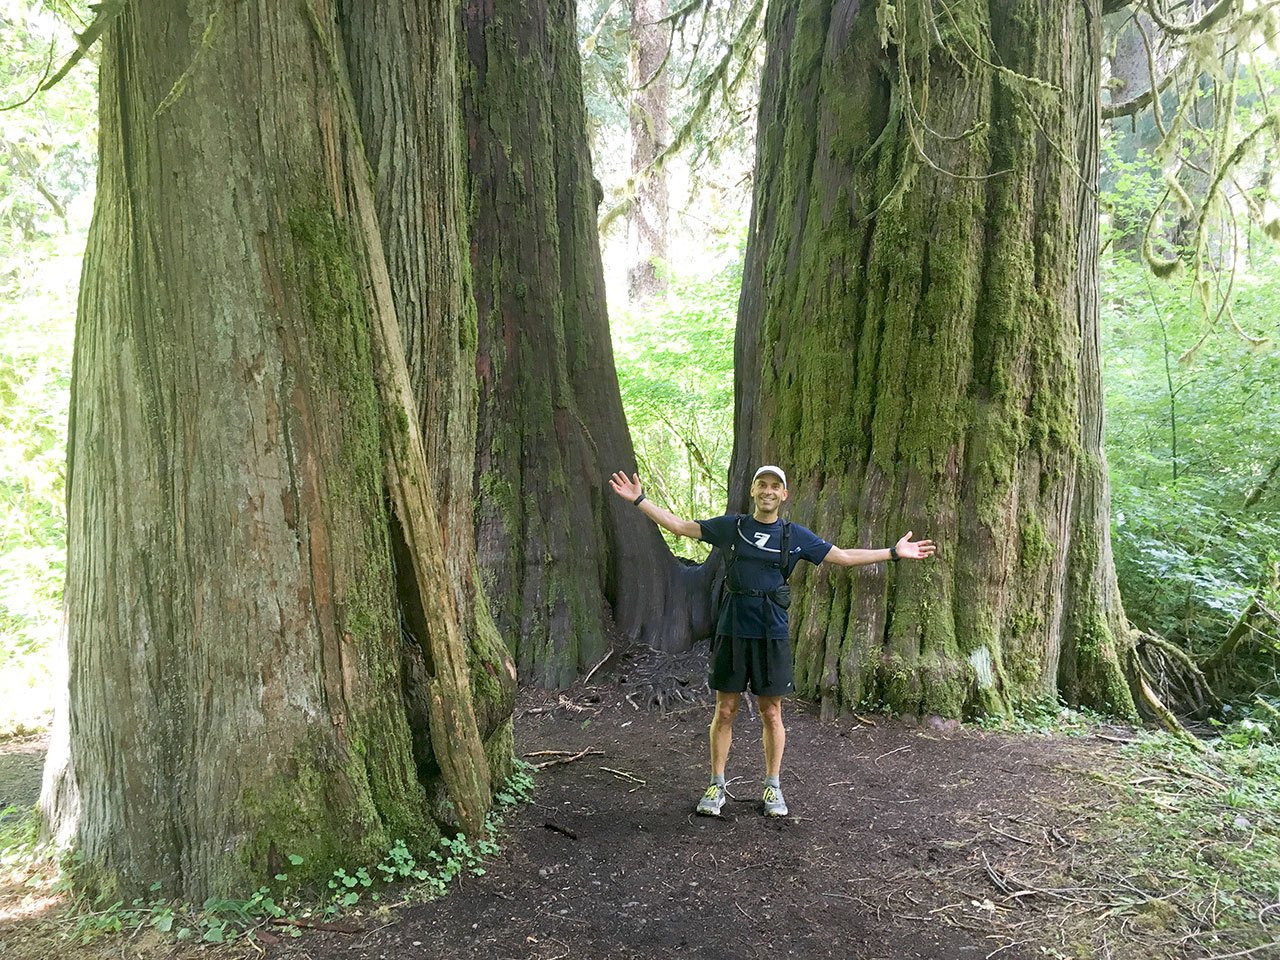 Former New York management consultant Bill Sycalik ran a 26.2-mile marathon in the Hoh Rainforest, the 13th in his National Parks Marathon Project. (Josh Sutcliffe)